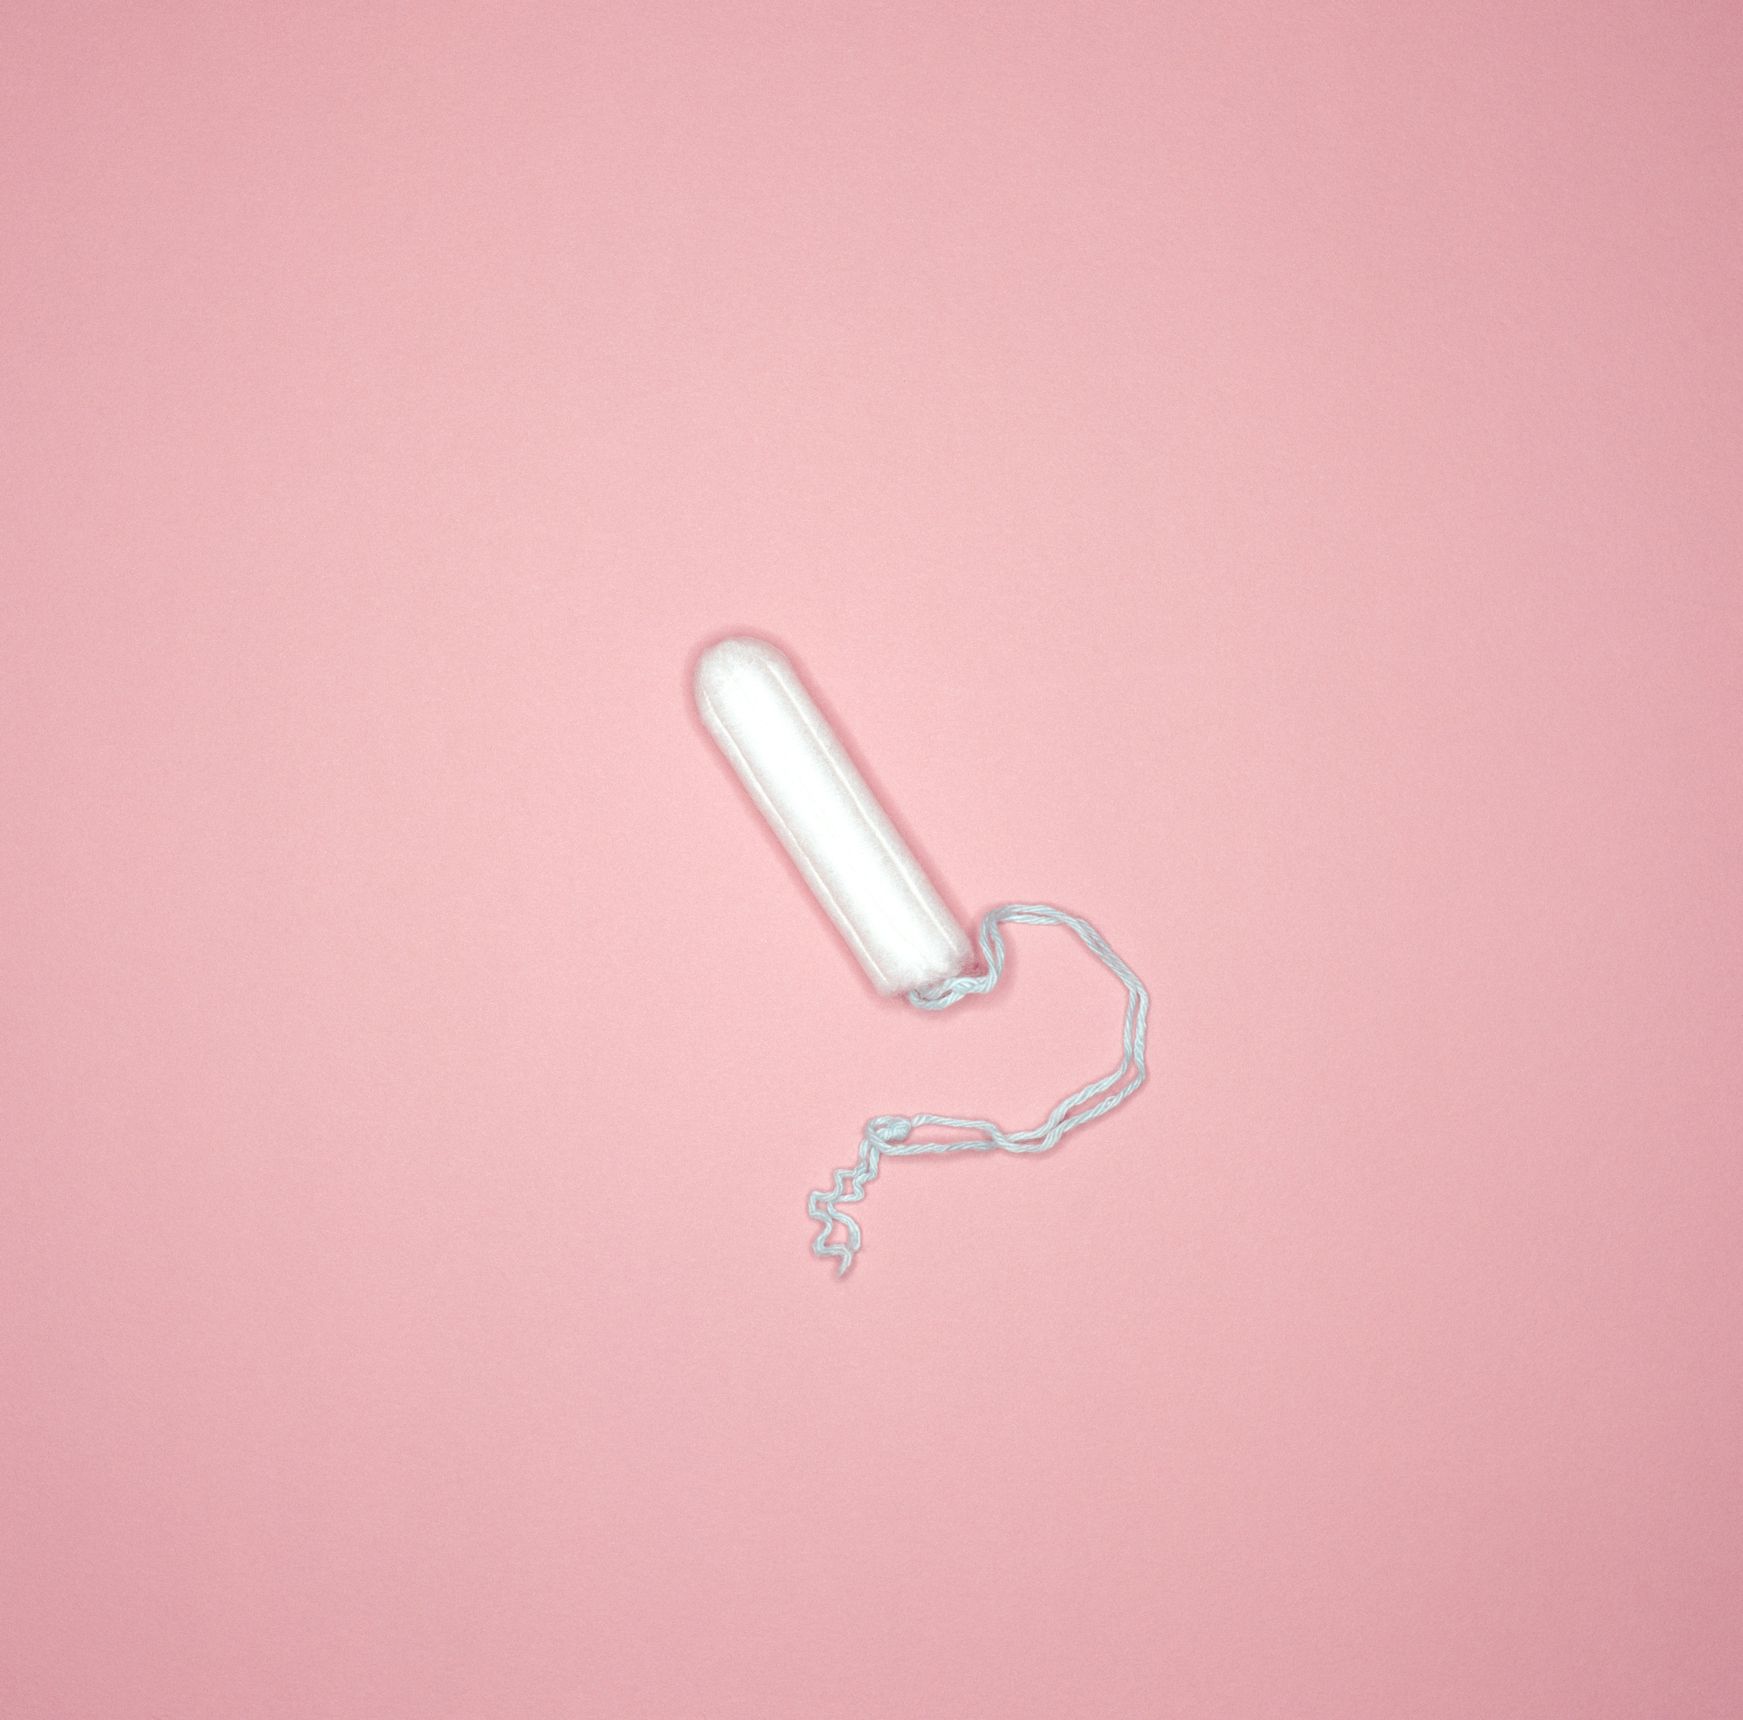 New toxic shock study touts bad tampon advice, expert says